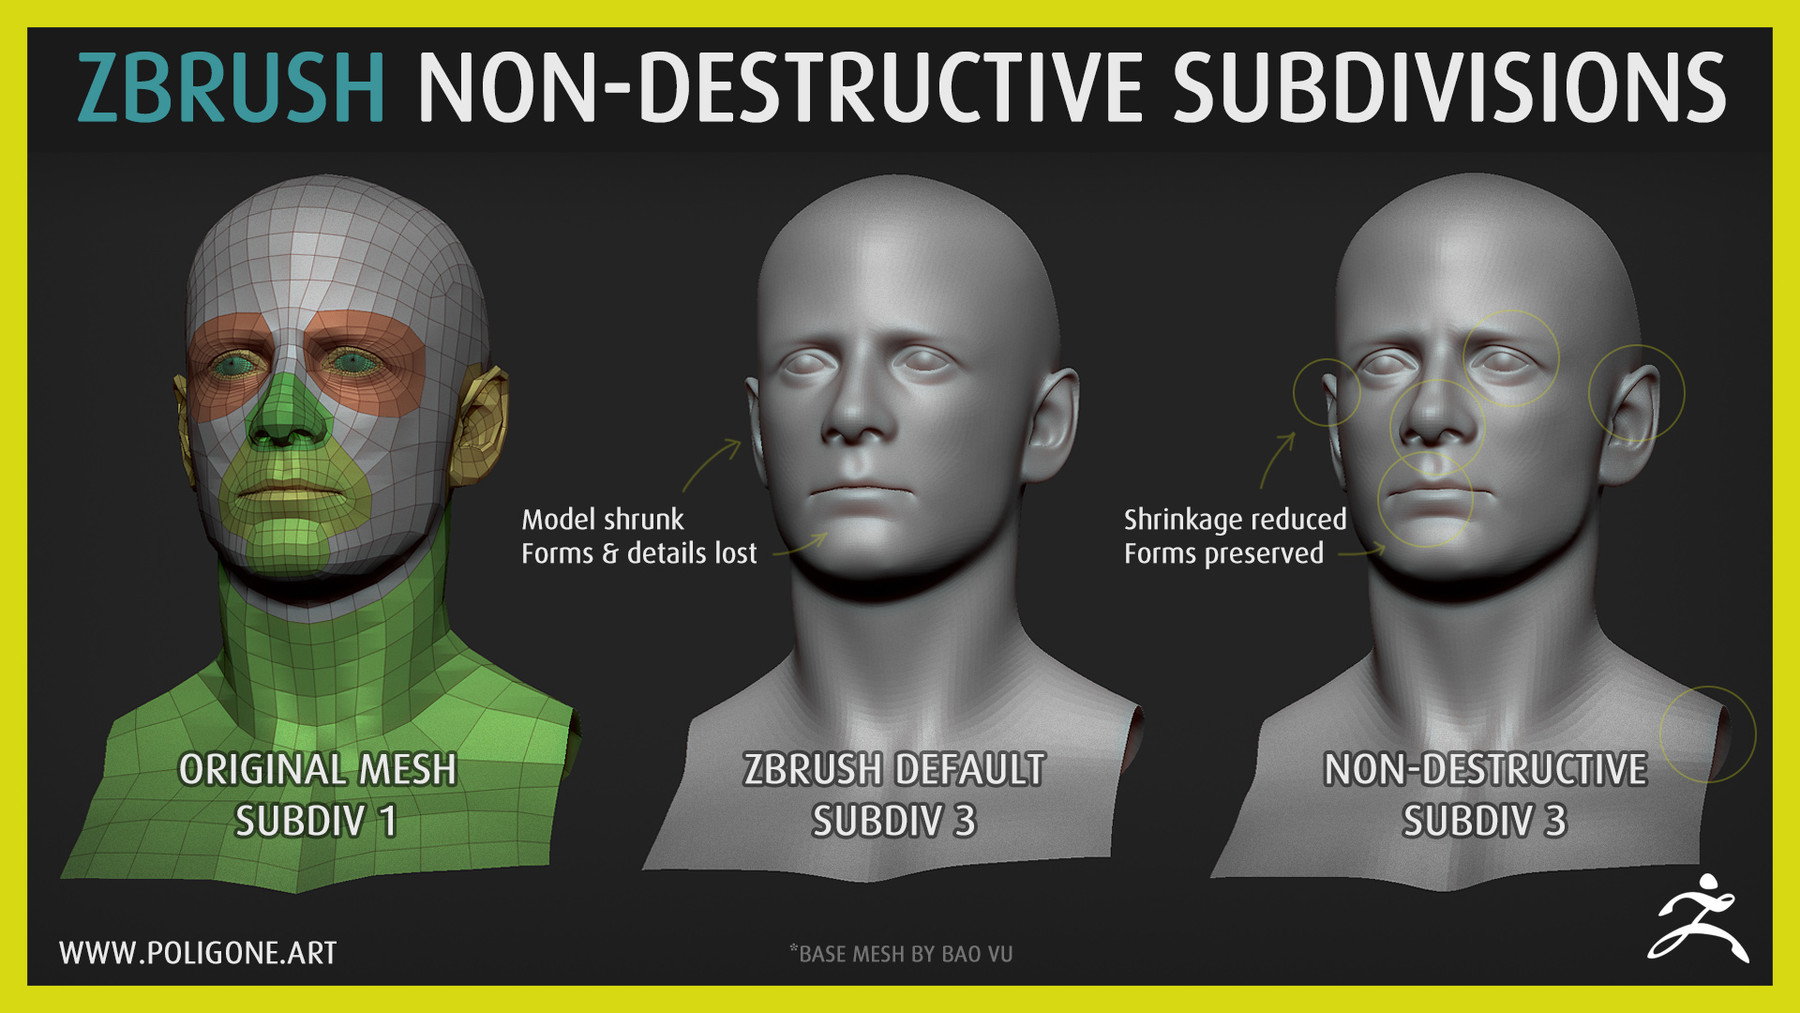 how to subdivide in zbrush without smoothing edges